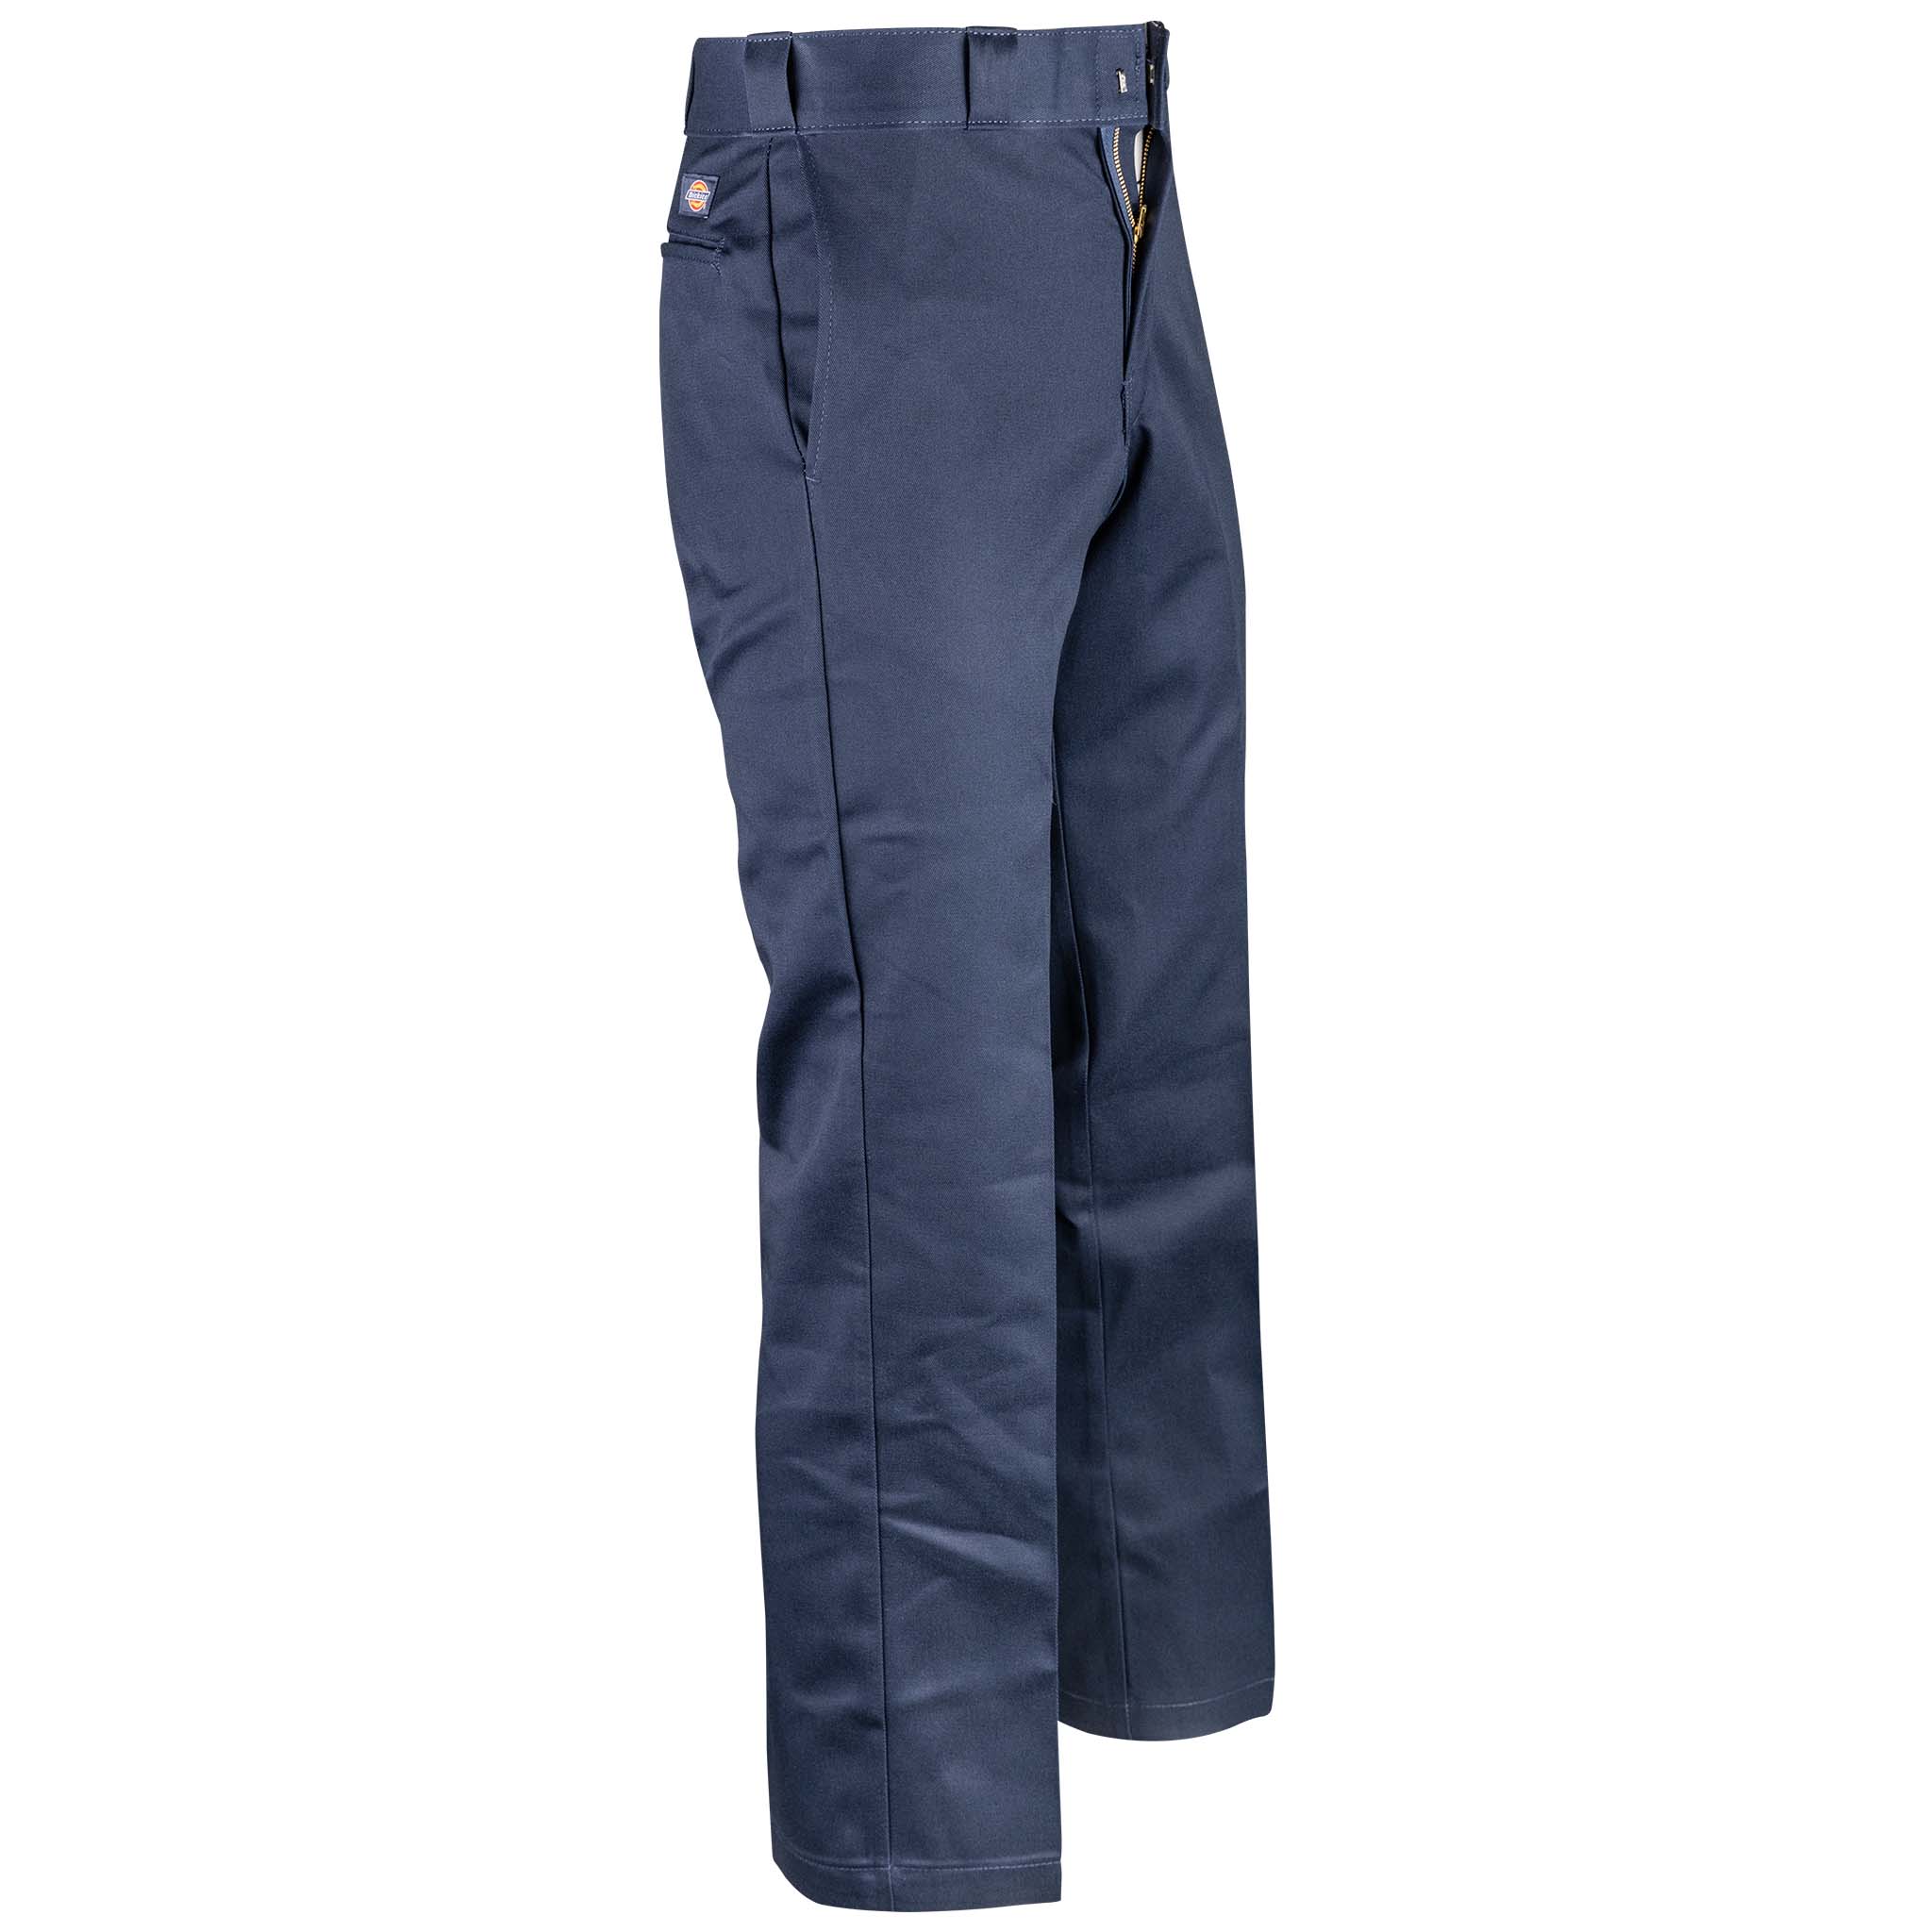 Dickies 874 Original Fit Work Pant - Navy - Clothing from Fat Buddha Store  UK